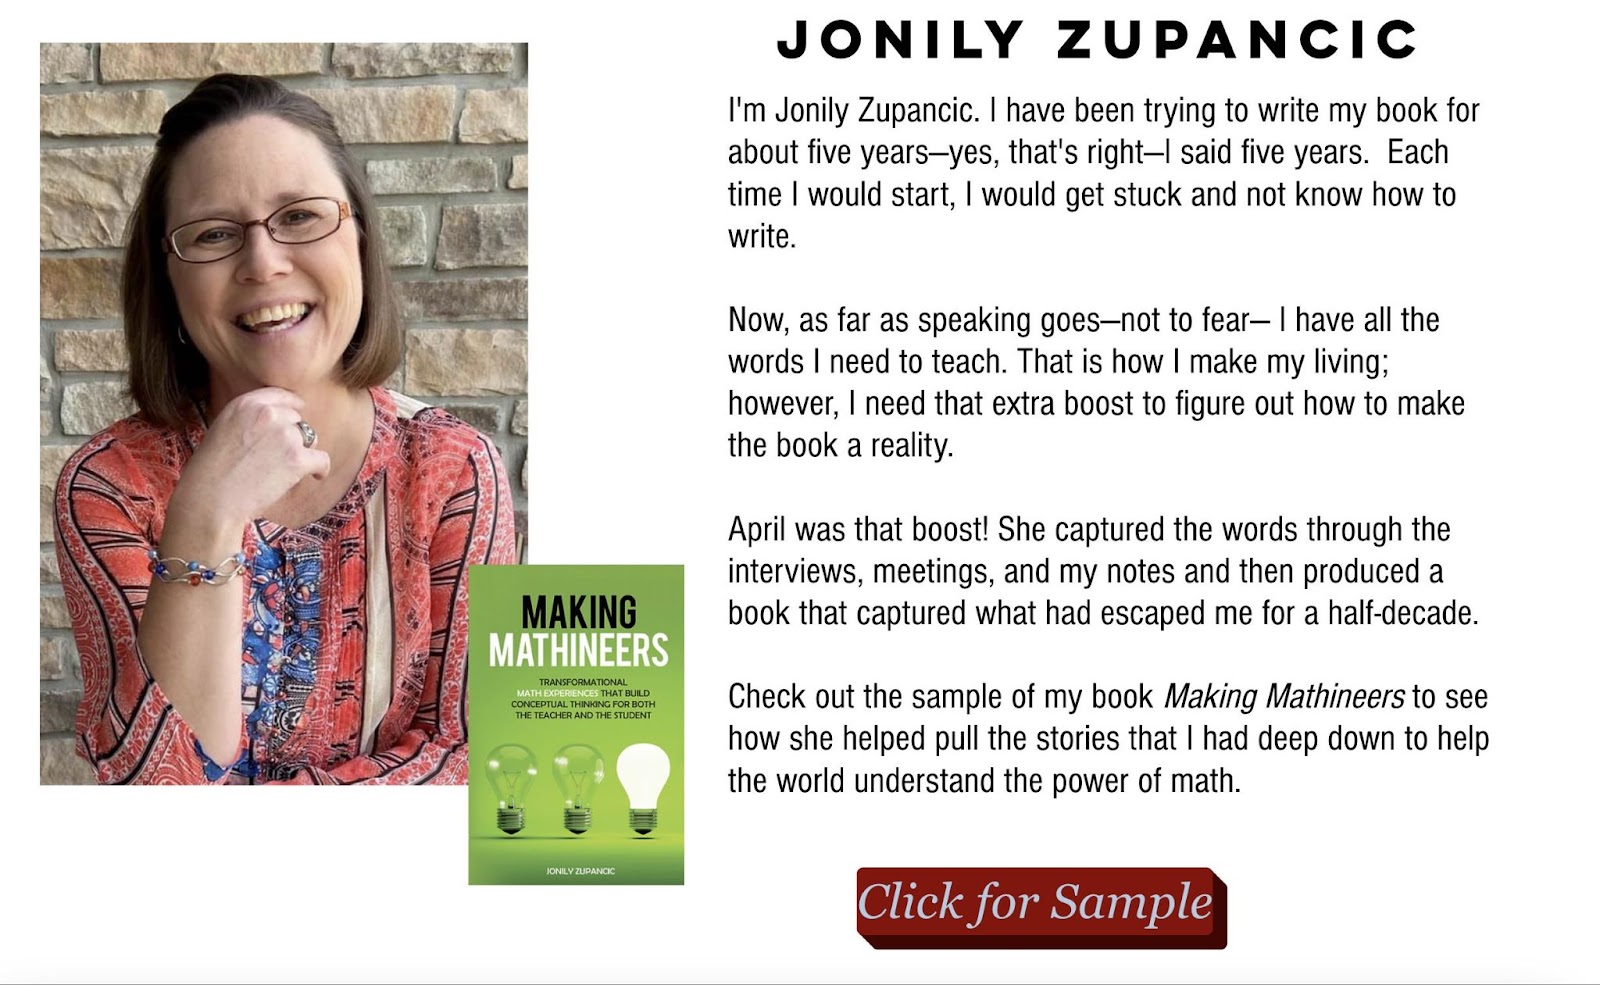 Jonily Zupancic's testimonial on April Tribe Giauque's book g،stwriting